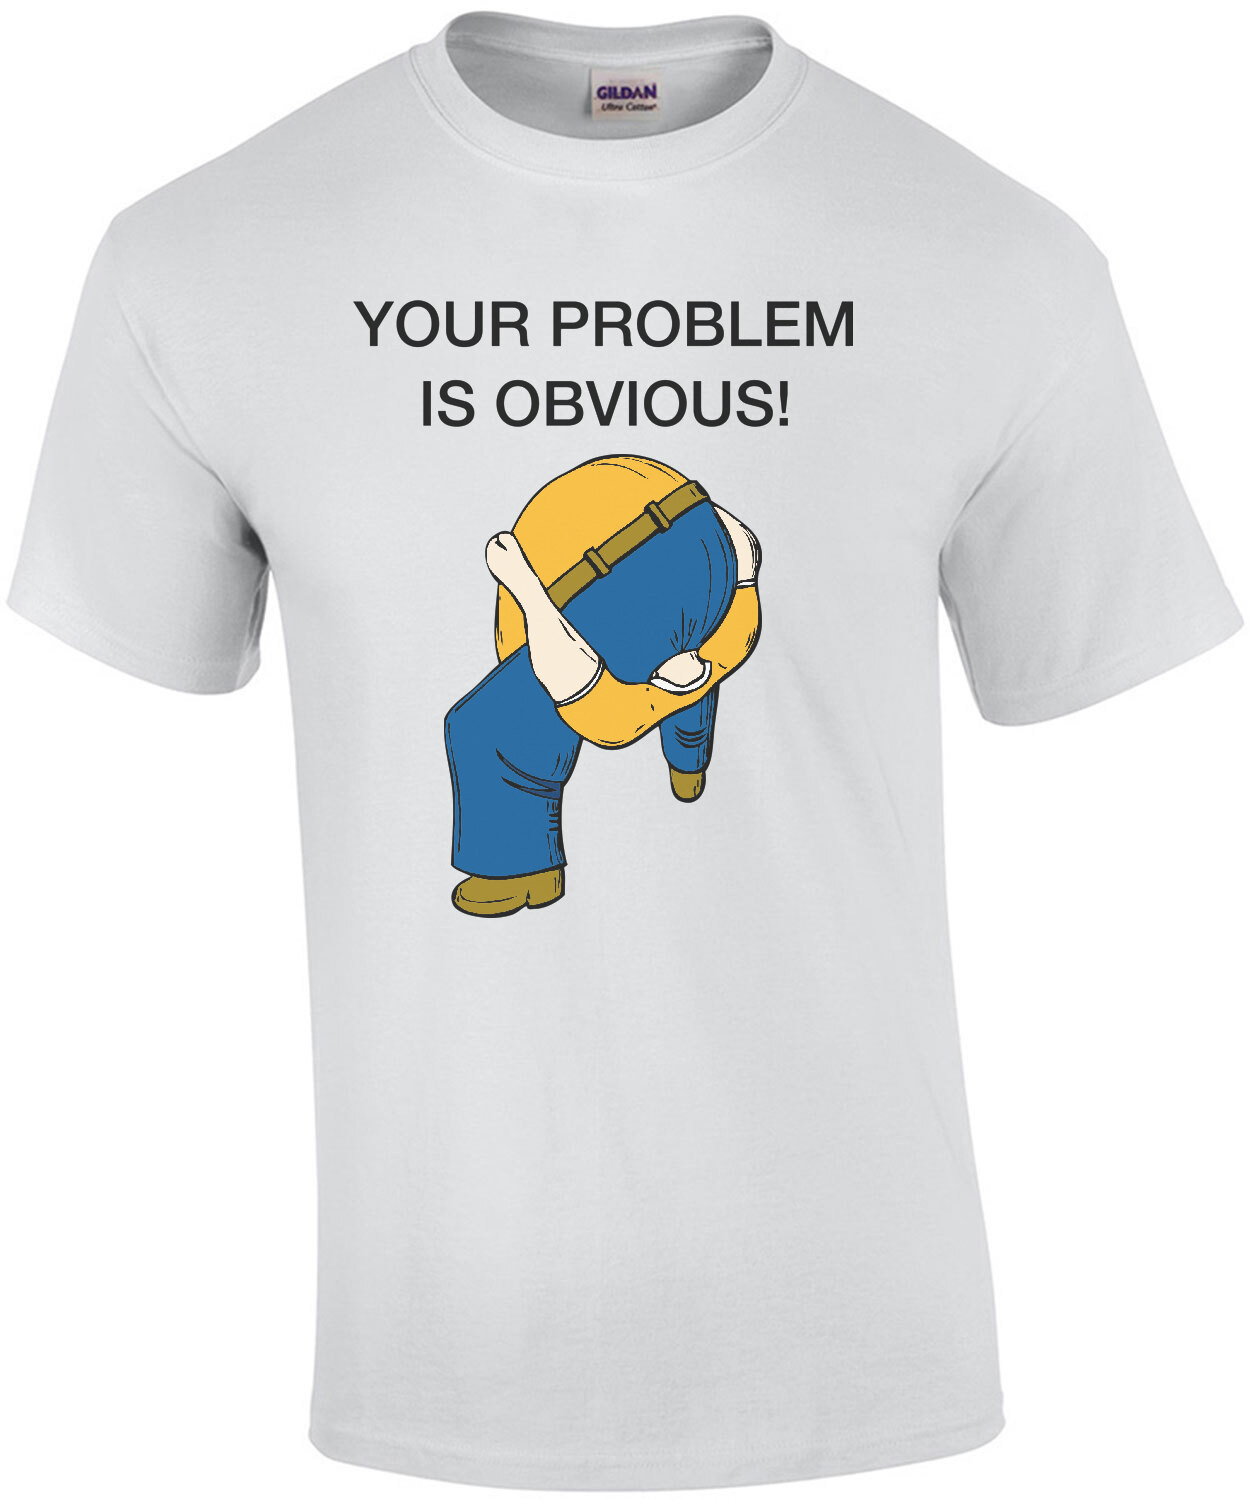 Your Problem is Obvious Shirt - Head Up Ass T-Shirt